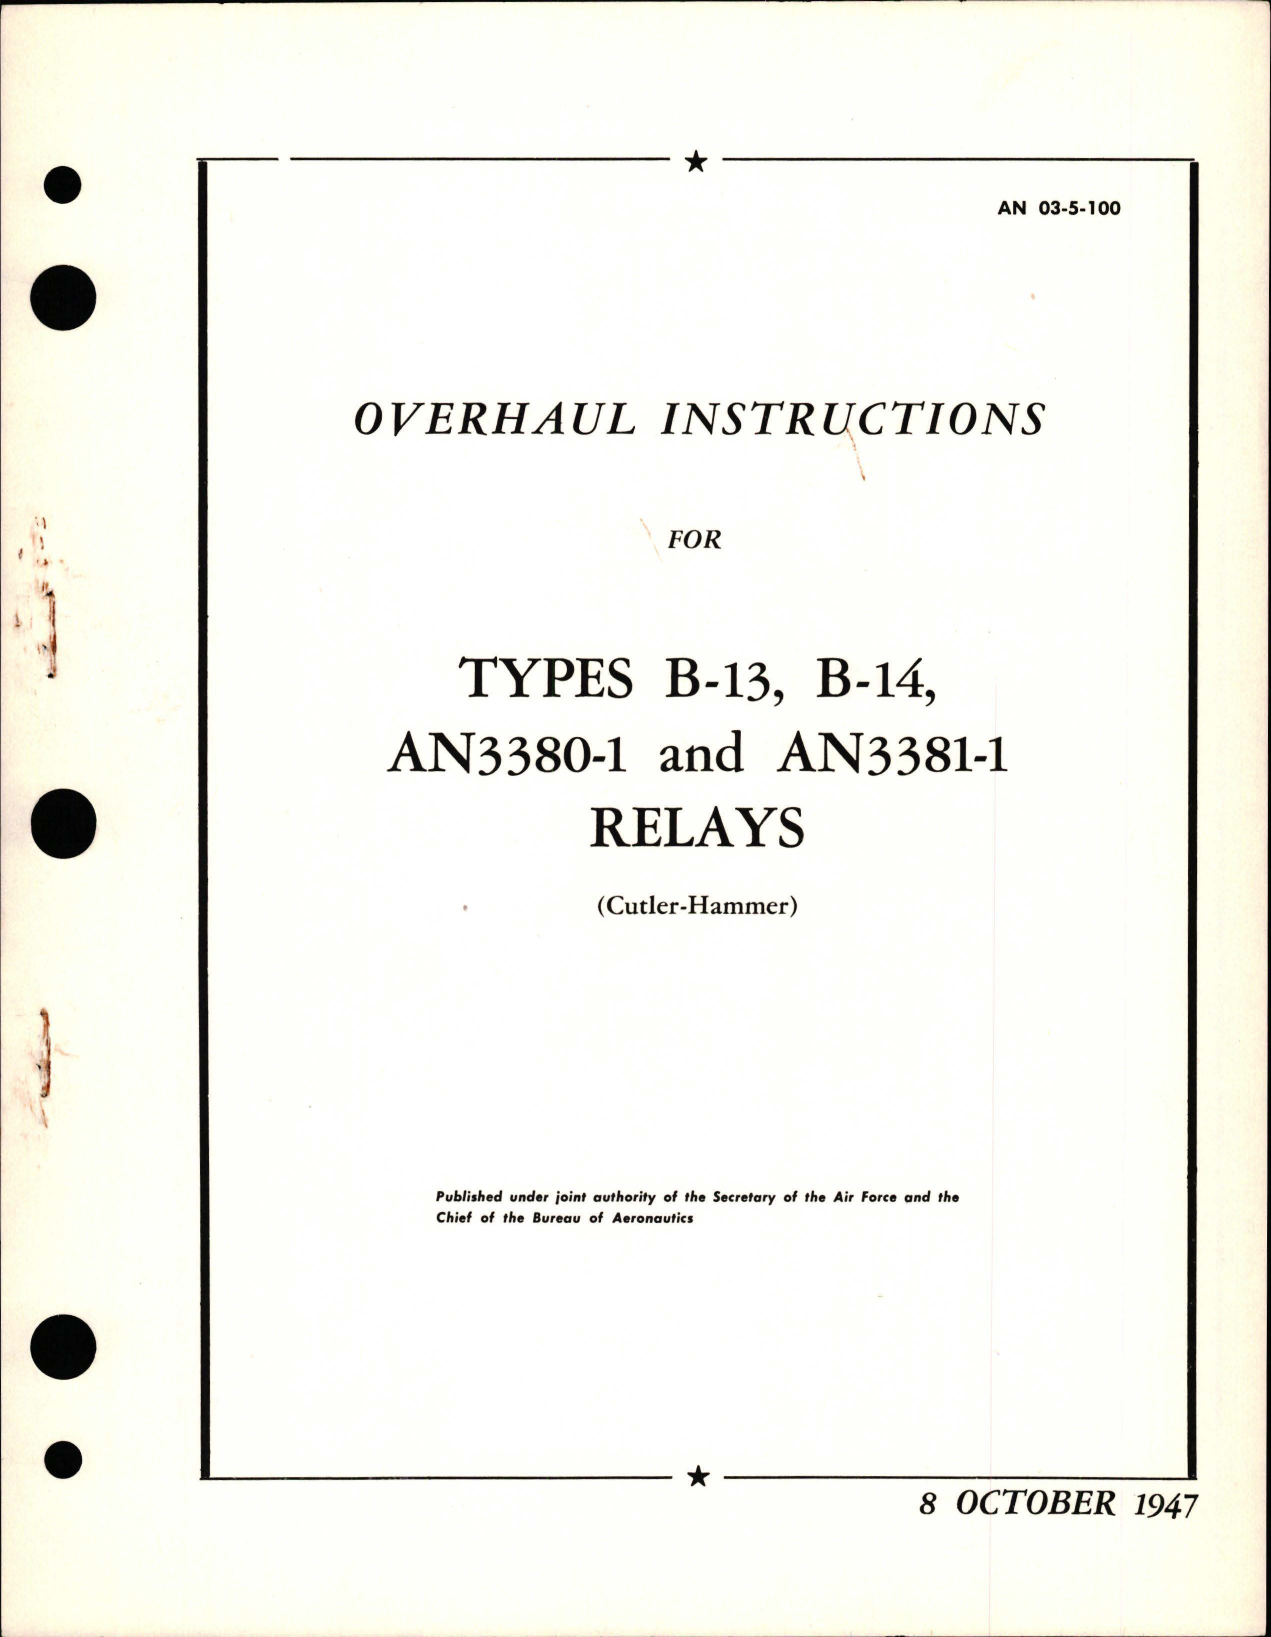 Sample page 1 from AirCorps Library document: Overhaul Instructions for Relays - Types B-13, B-14, SAN3380-1, and AN3381-1